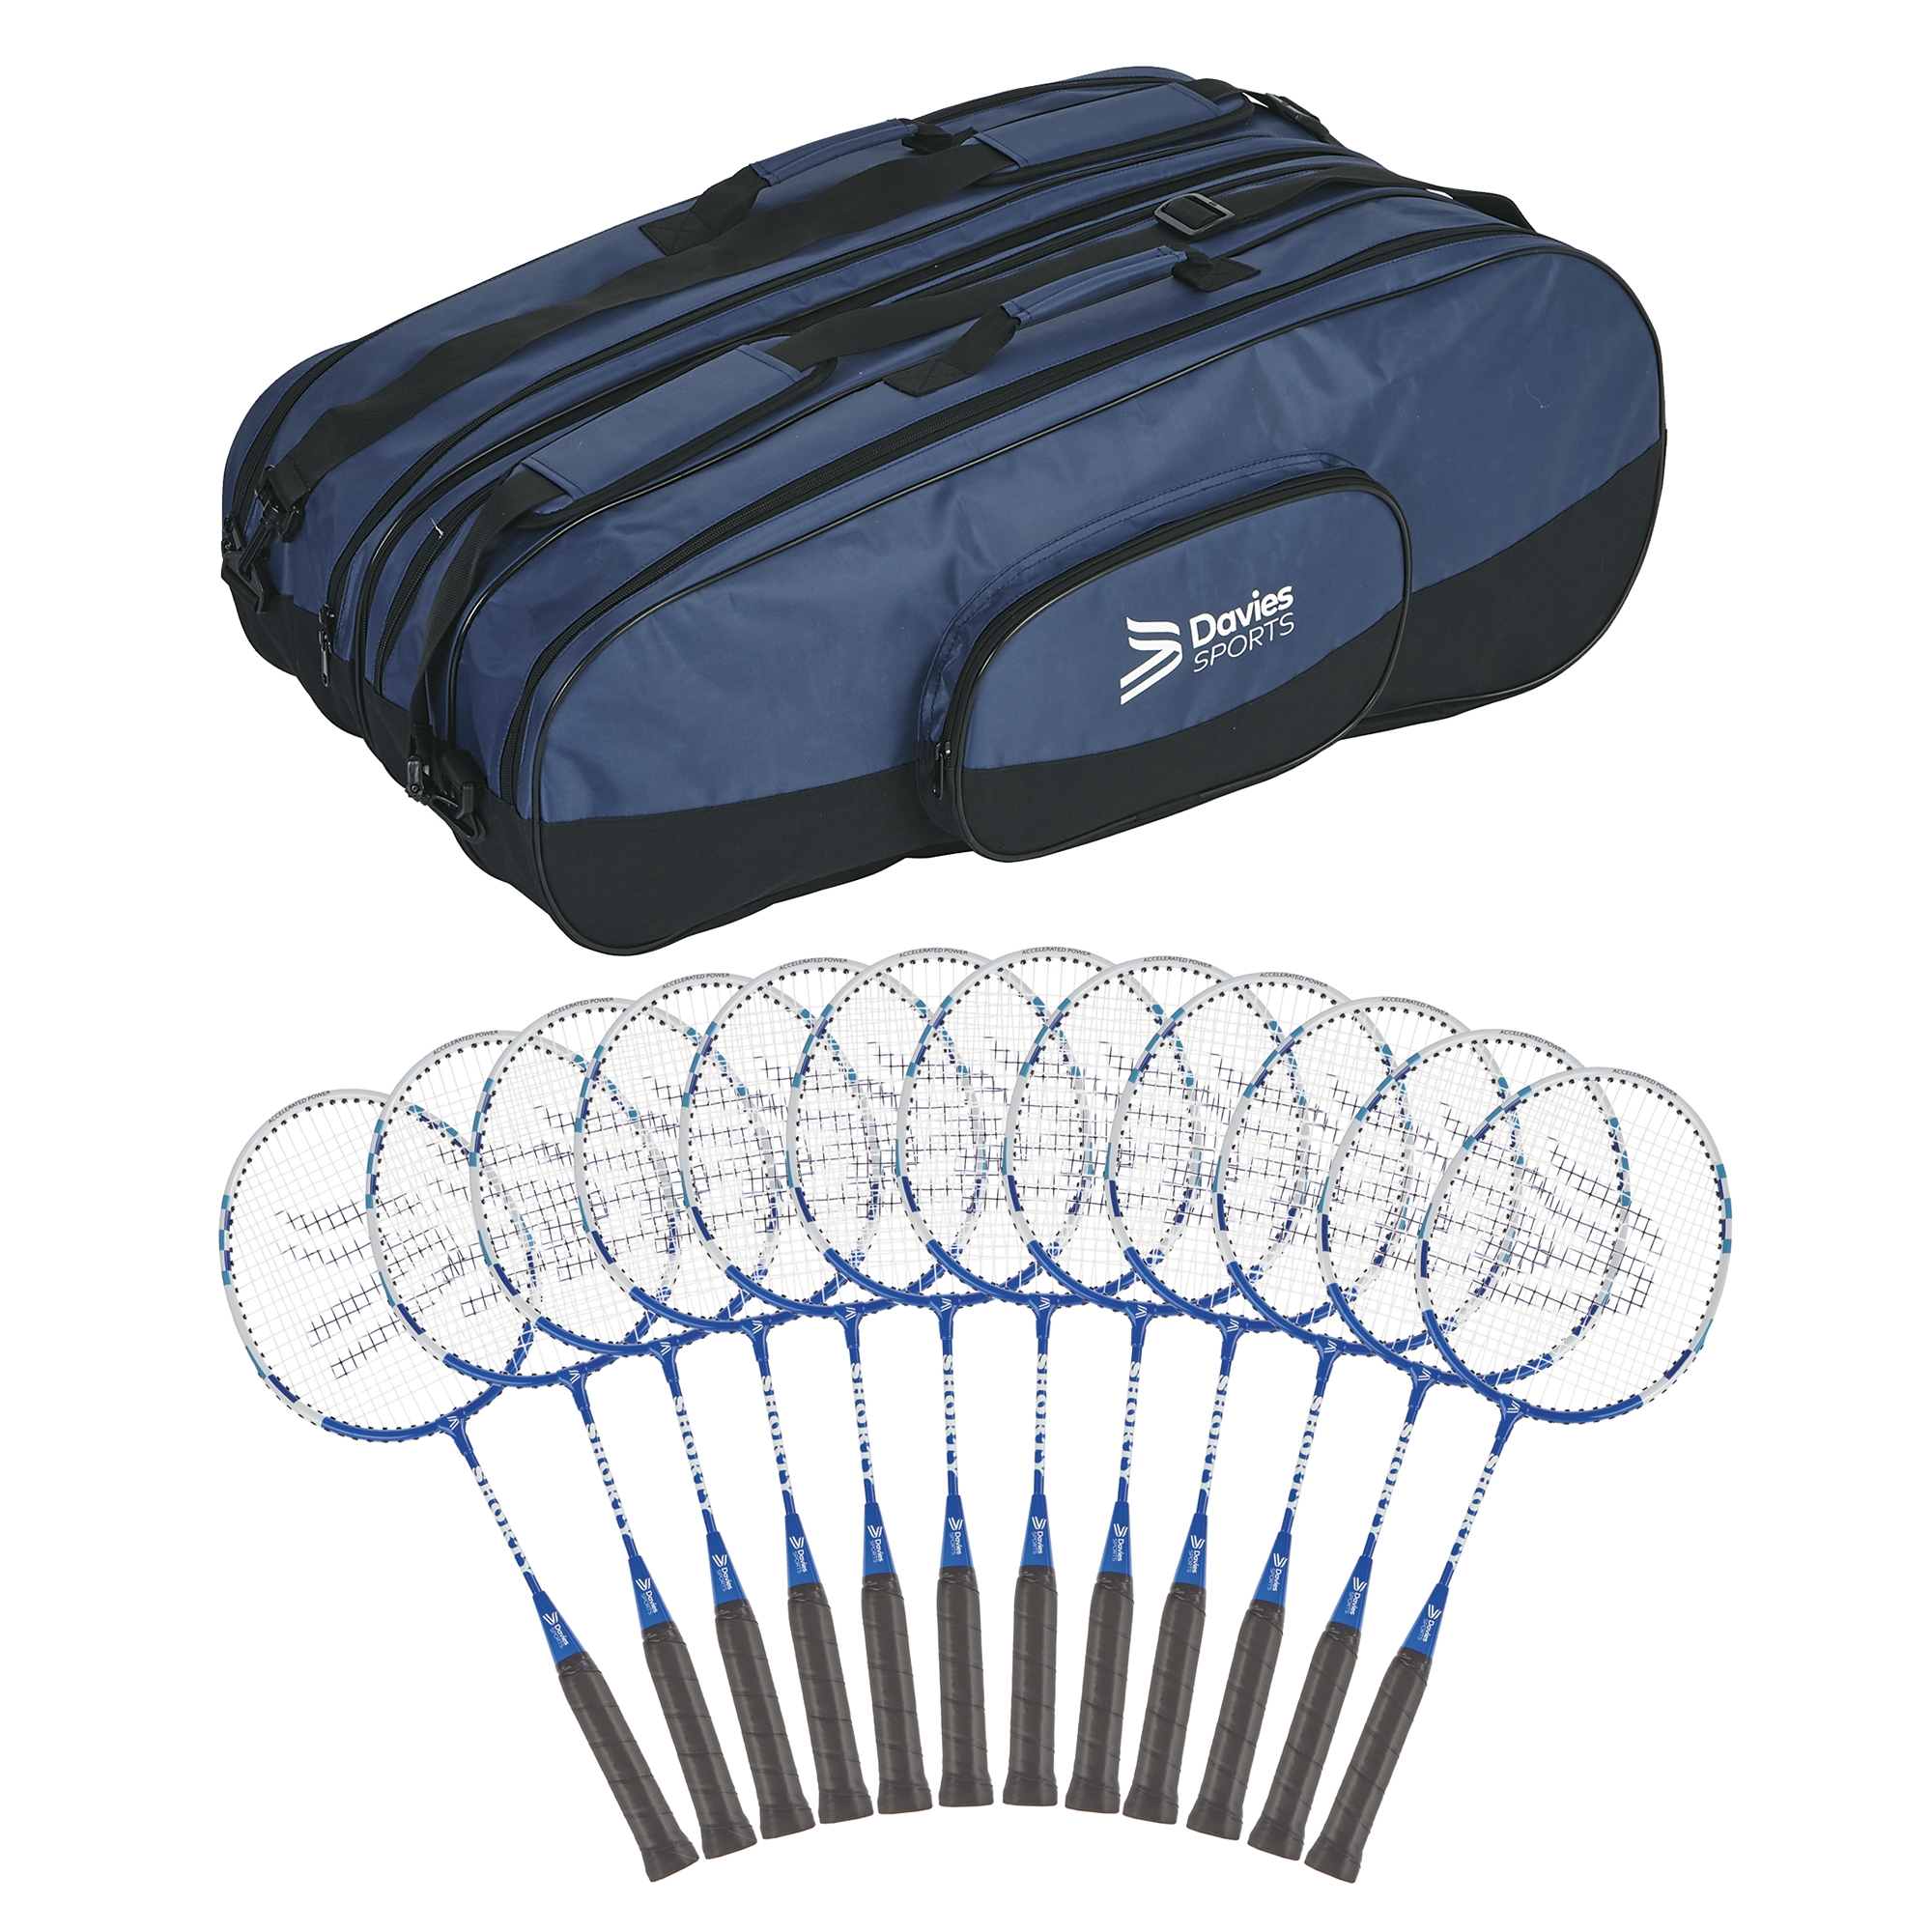 Davies Sports Shorty Racquet - Pack of 12